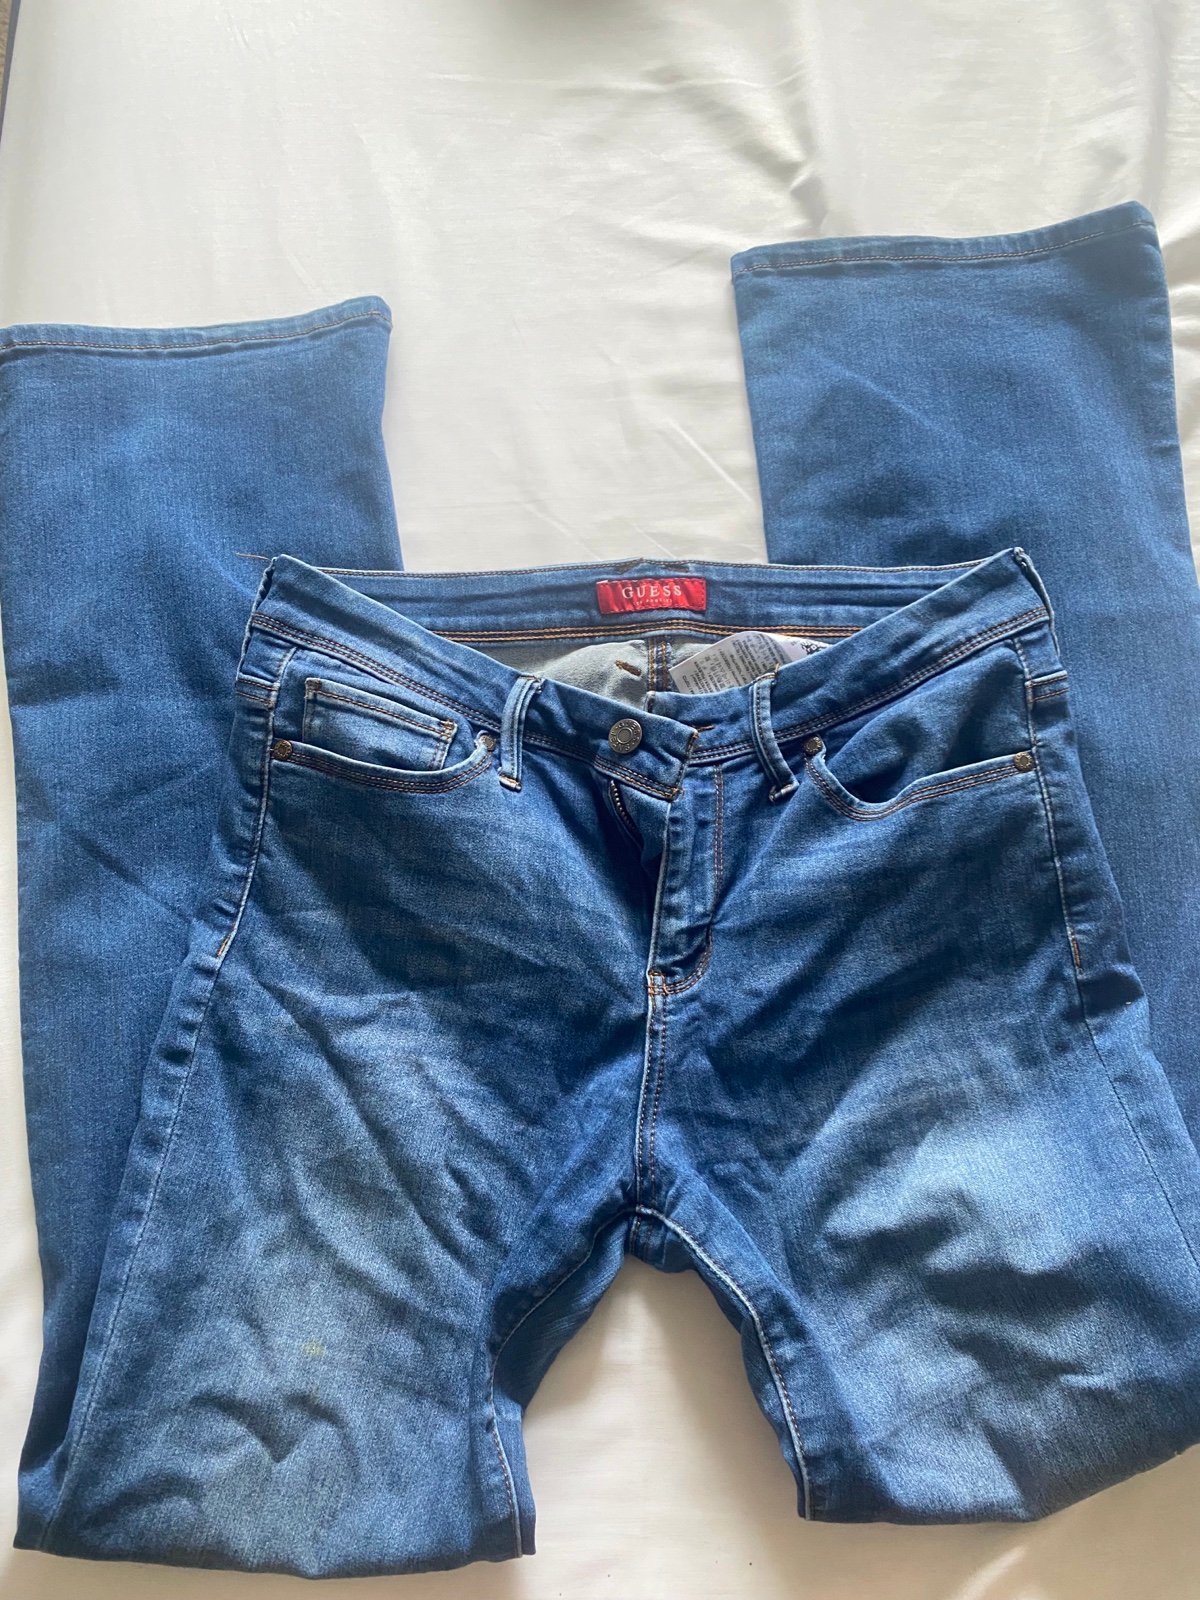 Amazing Guess flare jeans kL0rBx3Fo Online Exclusive